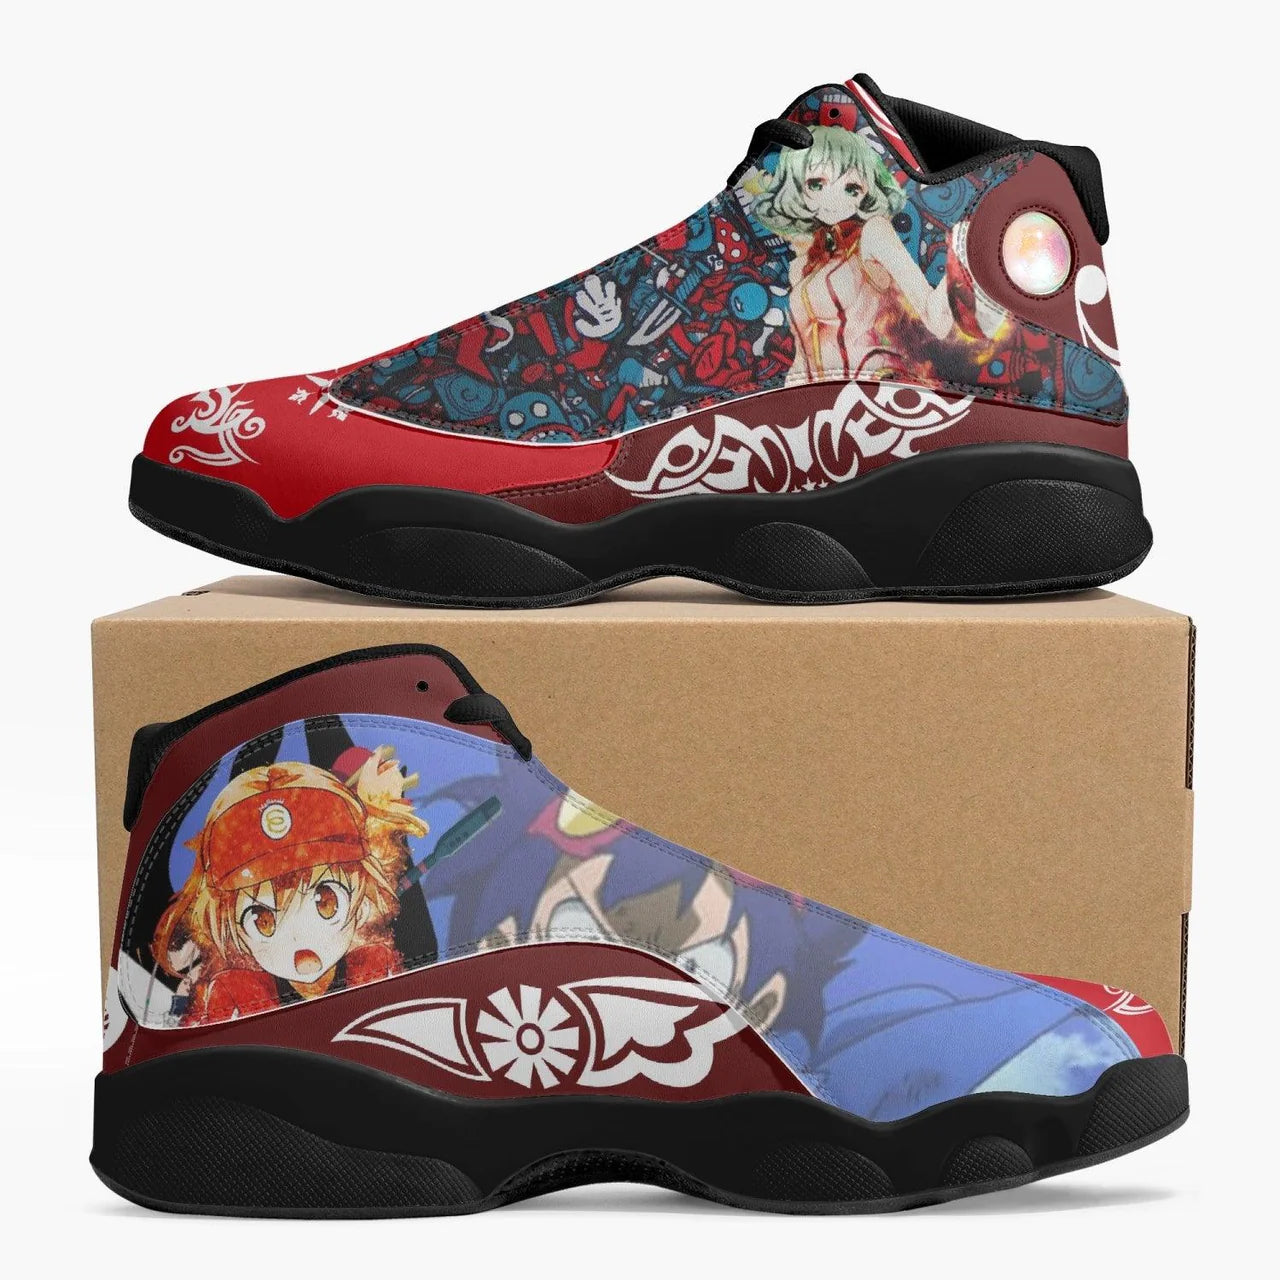 Top Anime Characters Featured in AyukoShop's Footwear Line